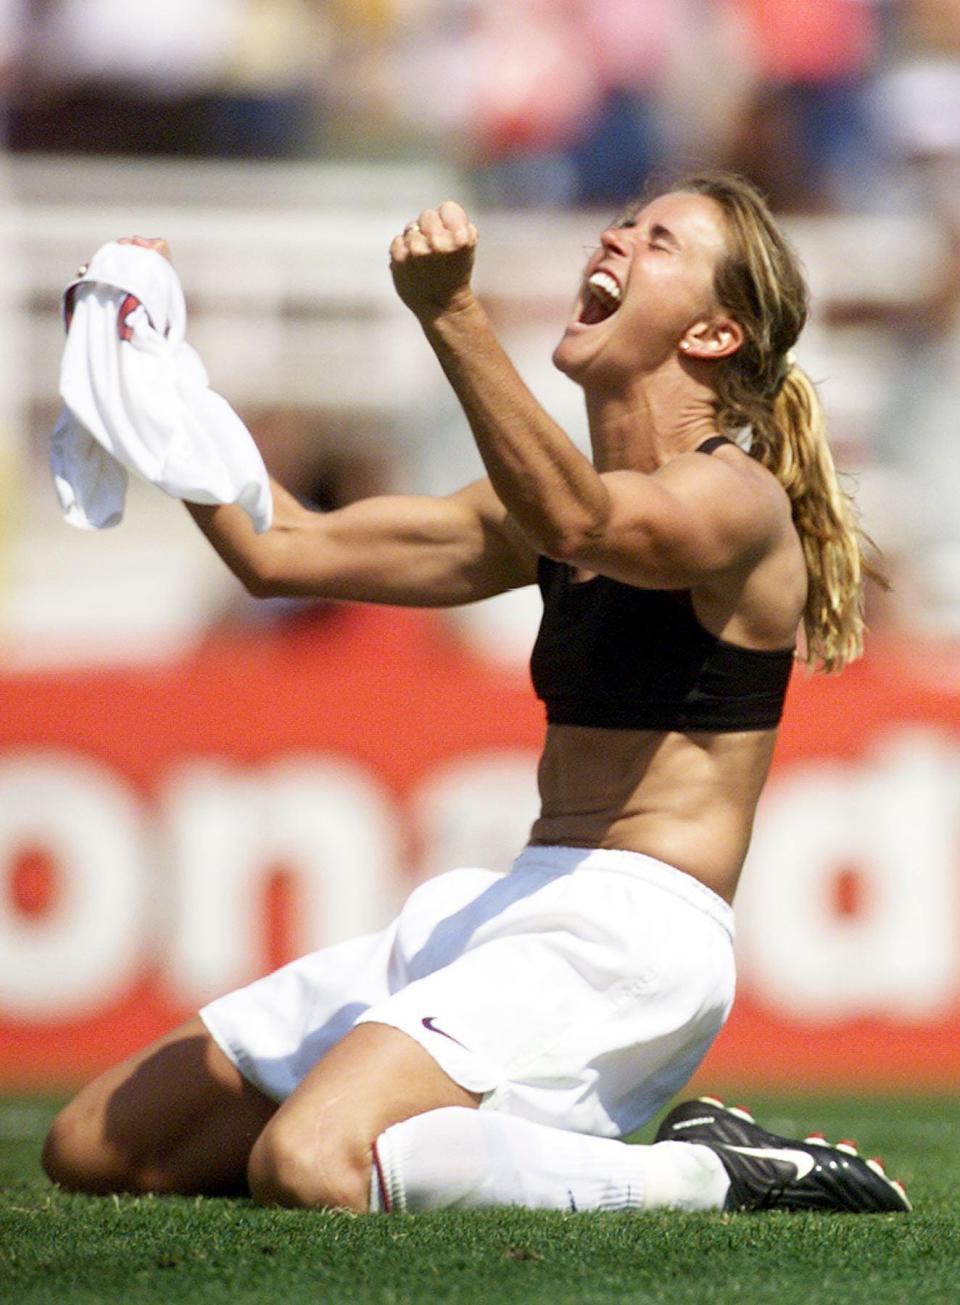 Brandi Chastain of the US celebrates after kicking the winning penalty shot to win the 1999 Women's World Cup final against China on July 10, 1999 at the Rose Bowl in Pasadena. The US won 5-4 on penalty kicks.